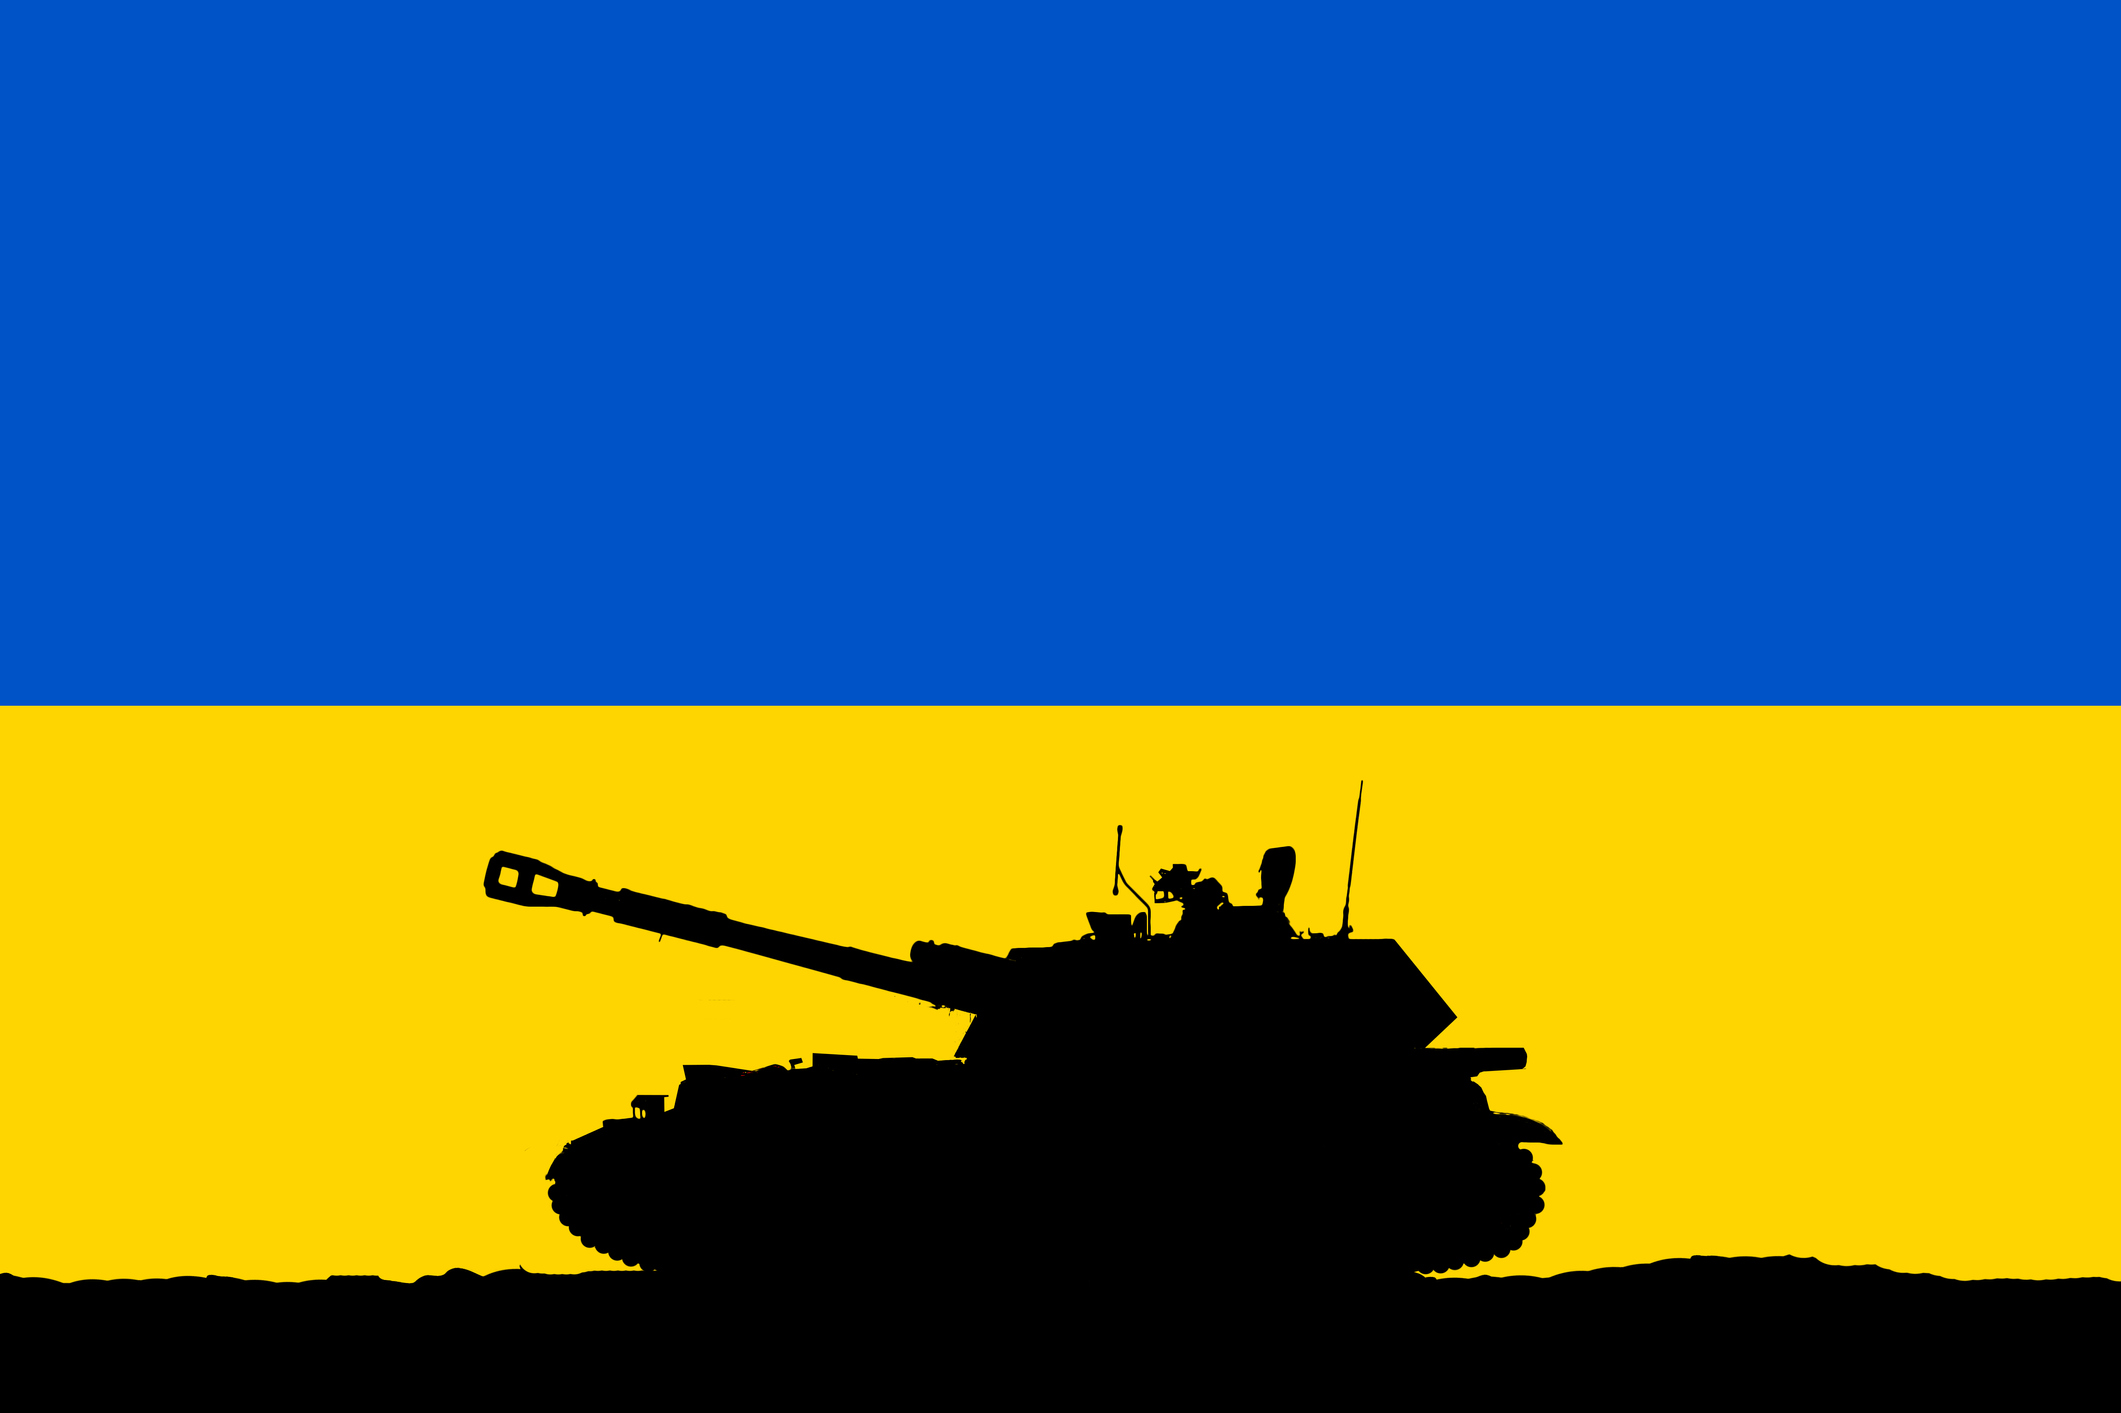 Conflict between Russia and Ukraine. Ukraine flag and tank. The concept of military threat and war